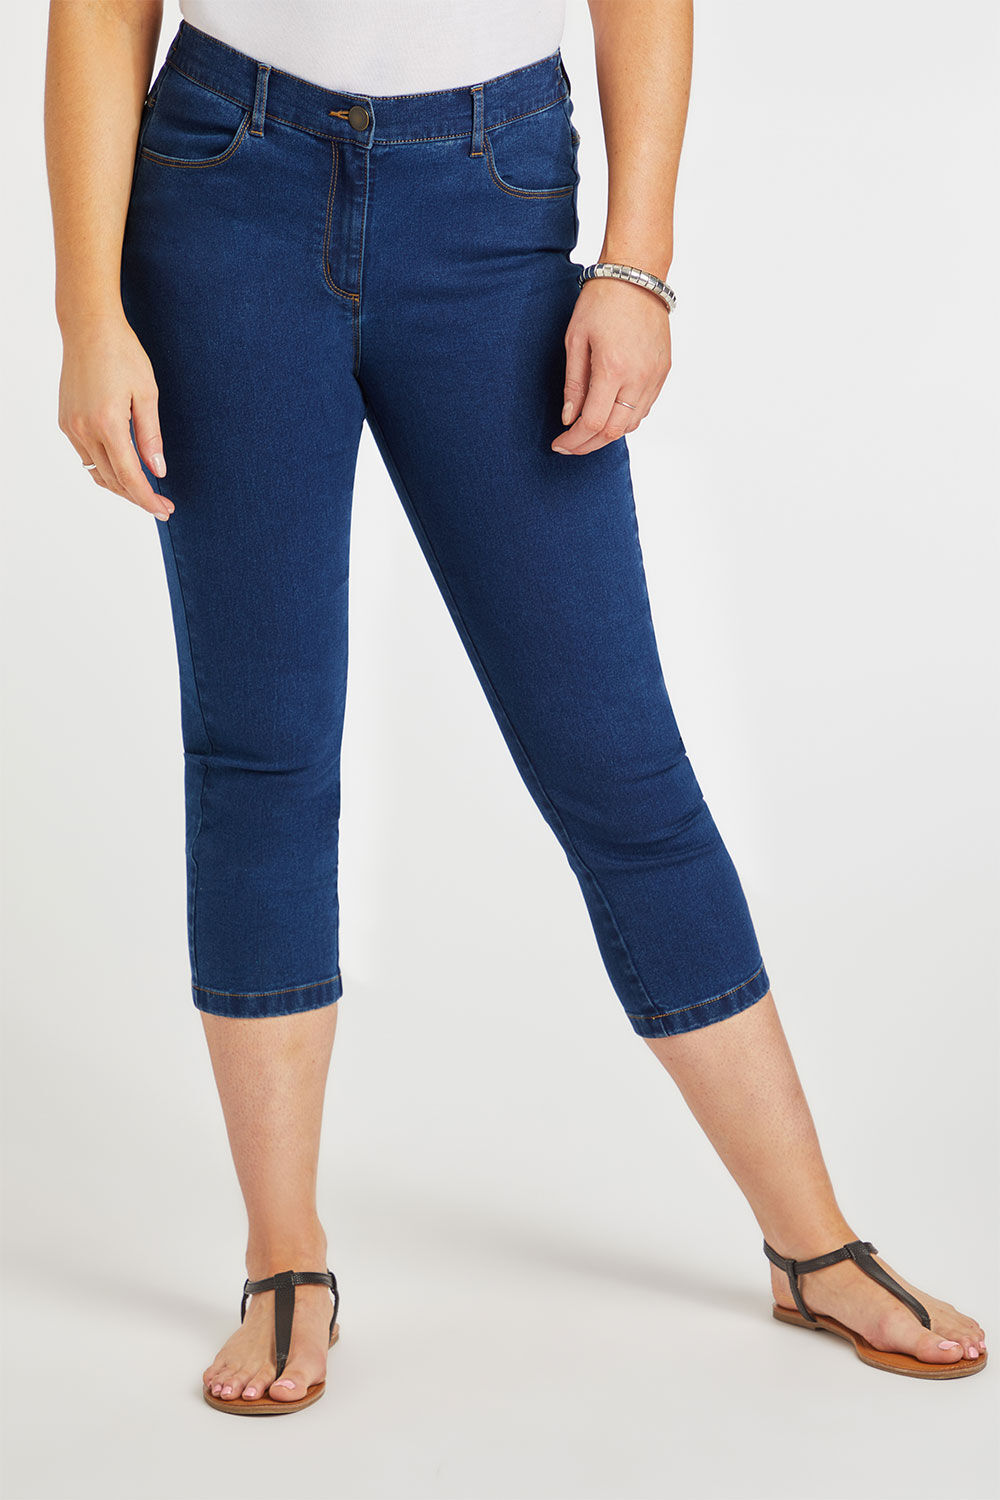 Knee Length Womens Trousers  Buy Knee Length Womens Trousers Online at  Best Prices In India  Flipkartcom